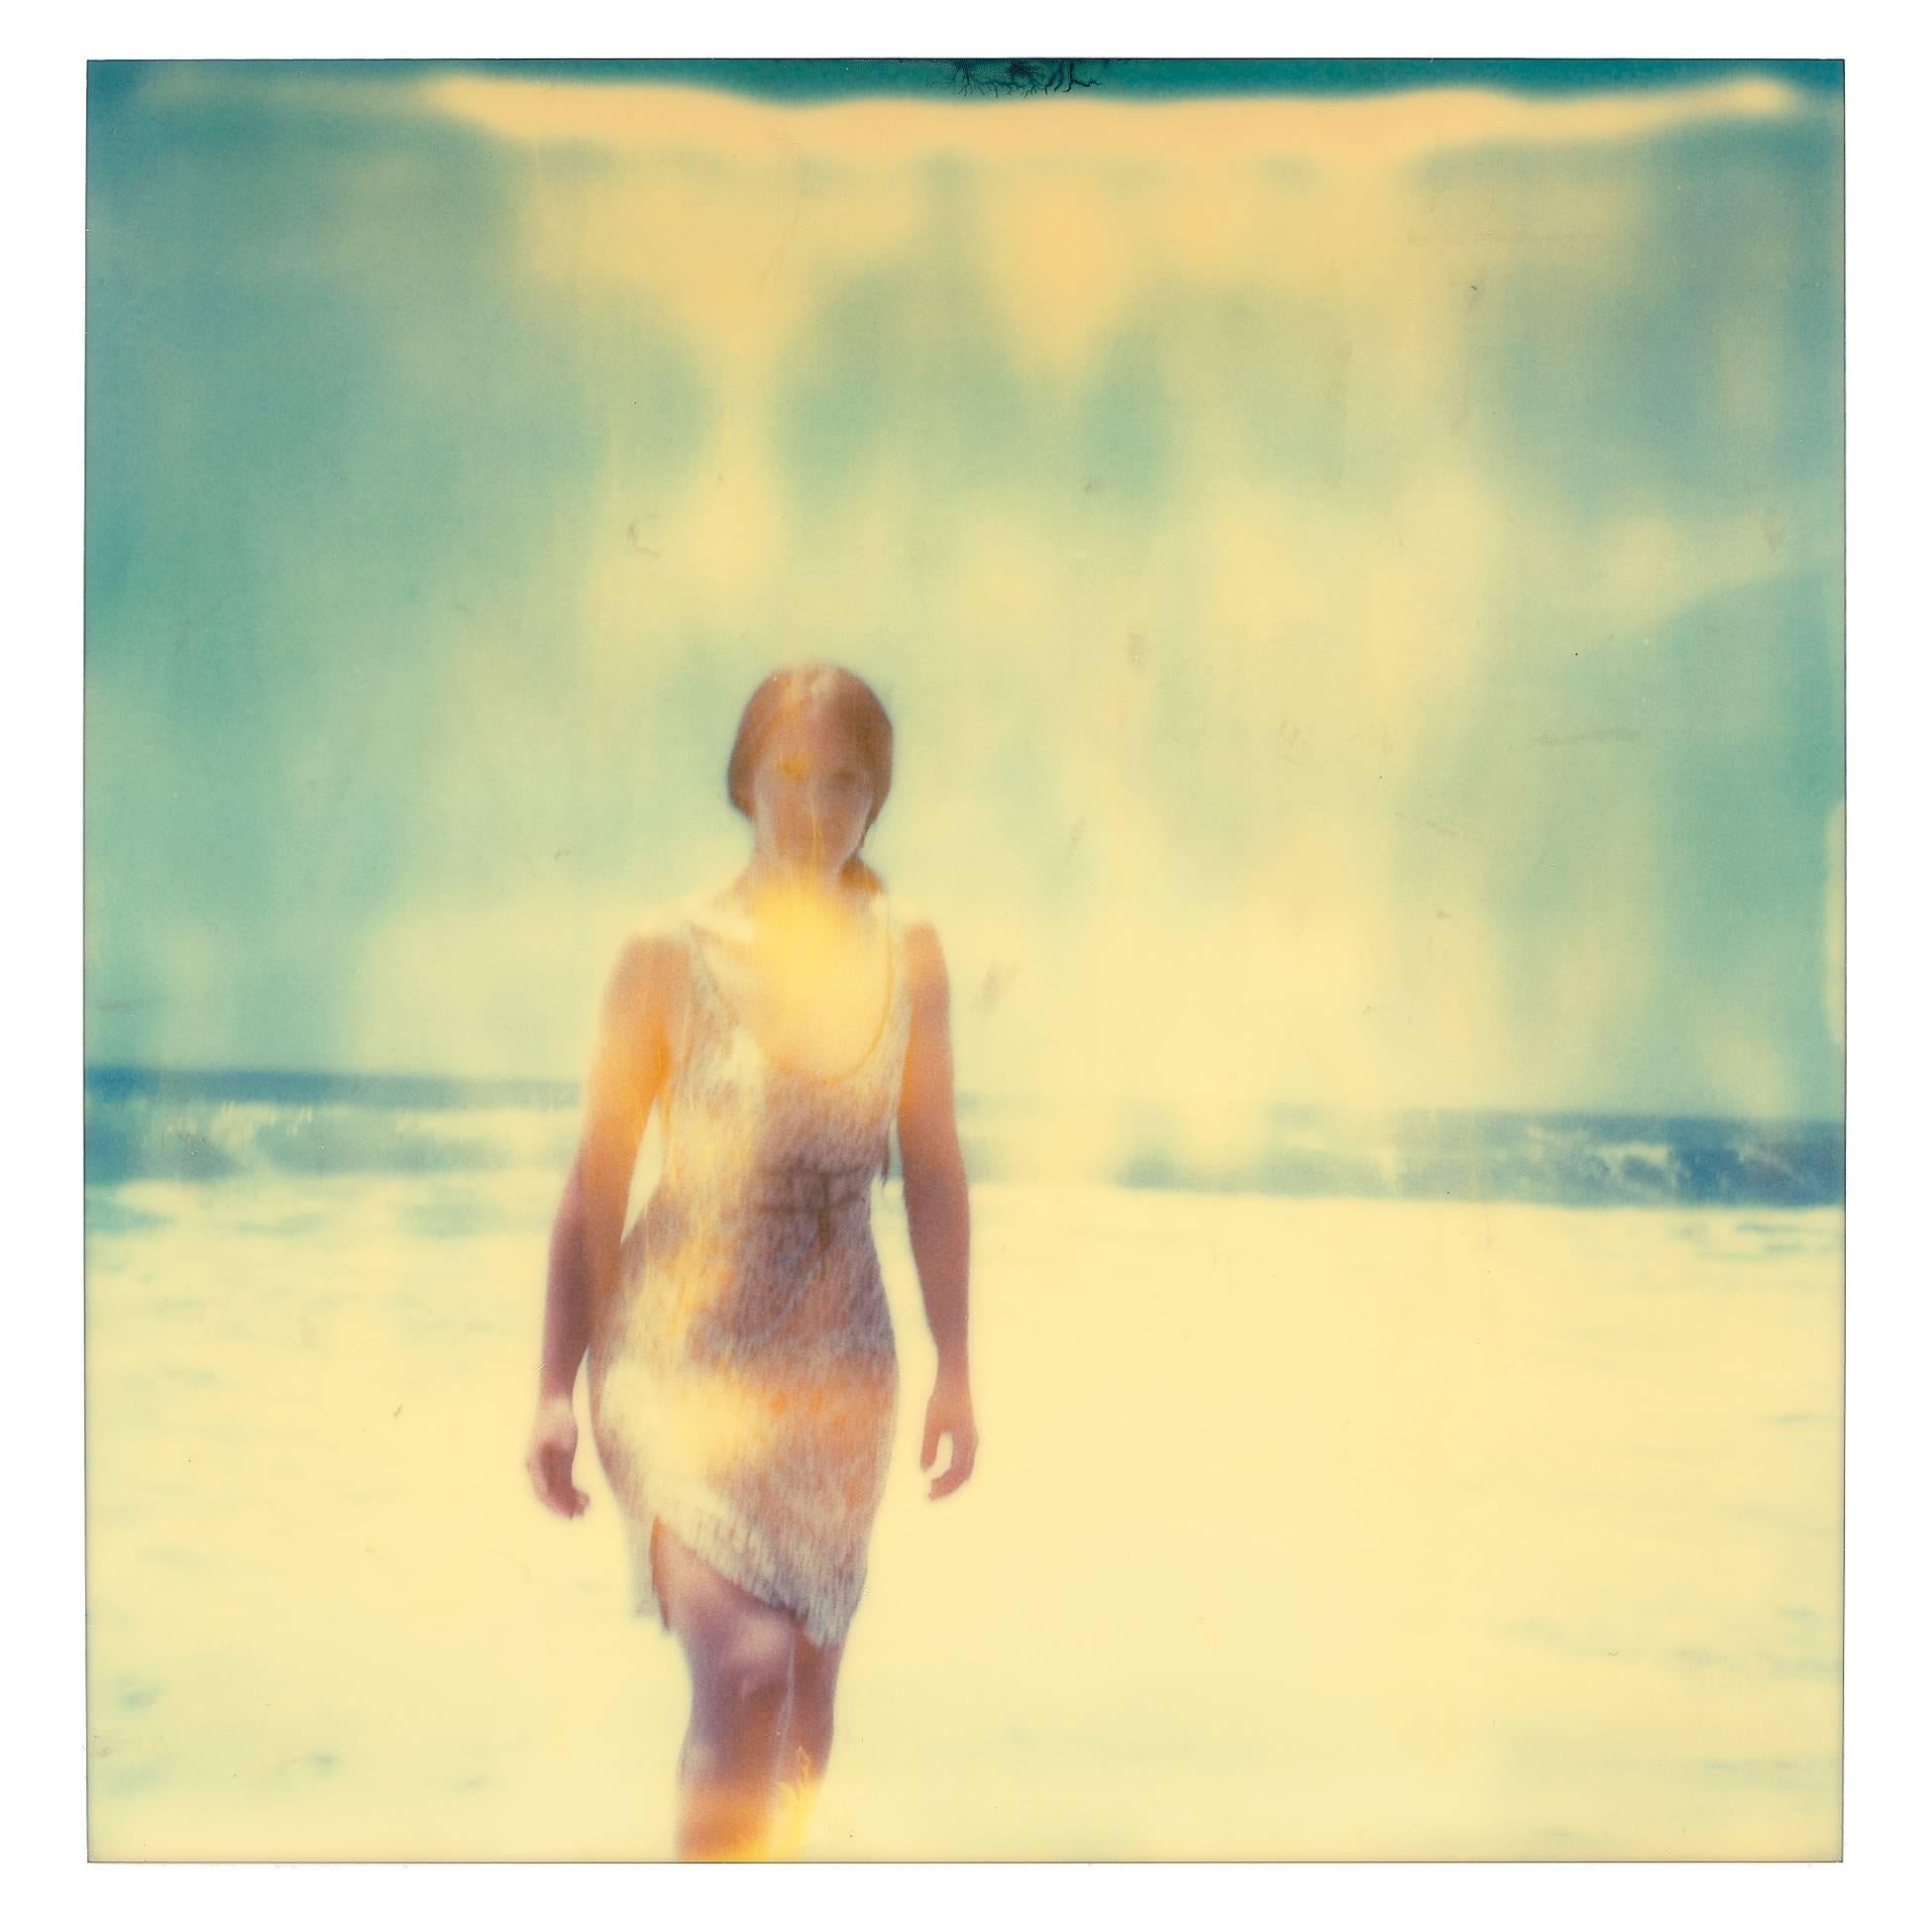 Woman in Malibu II (Stranger than Paradise), 1999, 

20x20cm, Edition 9/10, 
Digital C-Print, based on a Polaroid
Certificate and Signature label, artist Inventory No. 315_2.26
Not mounted.

LIFE’S A DREAM
(The Personal World of Stefanie